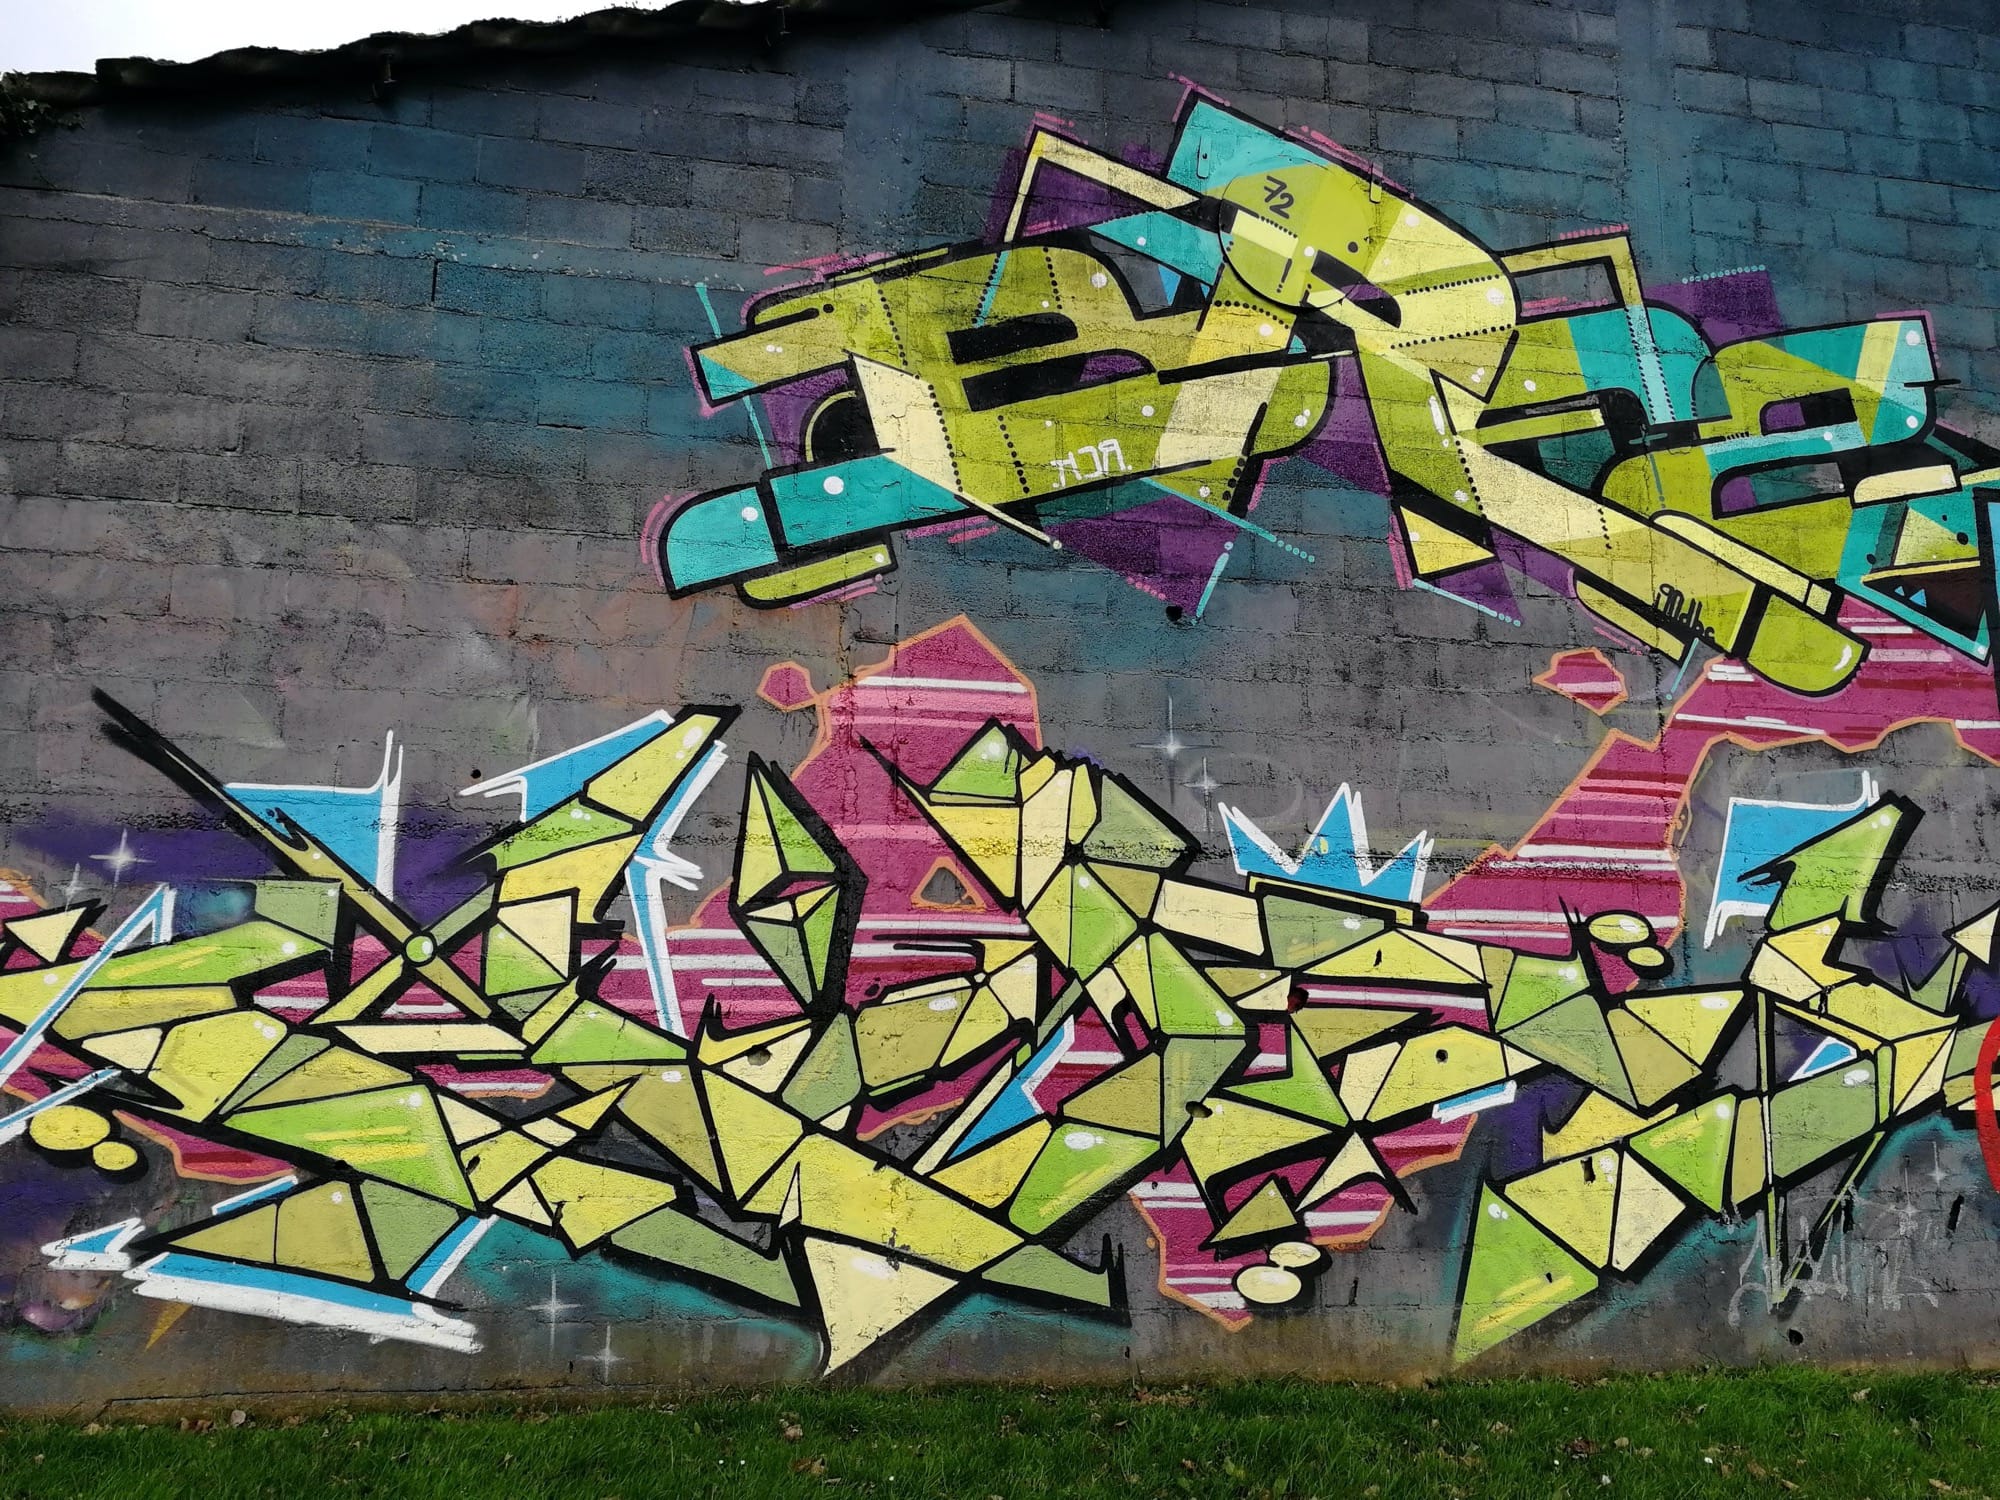 Graffiti 1217  captured by Rabot in Redon France